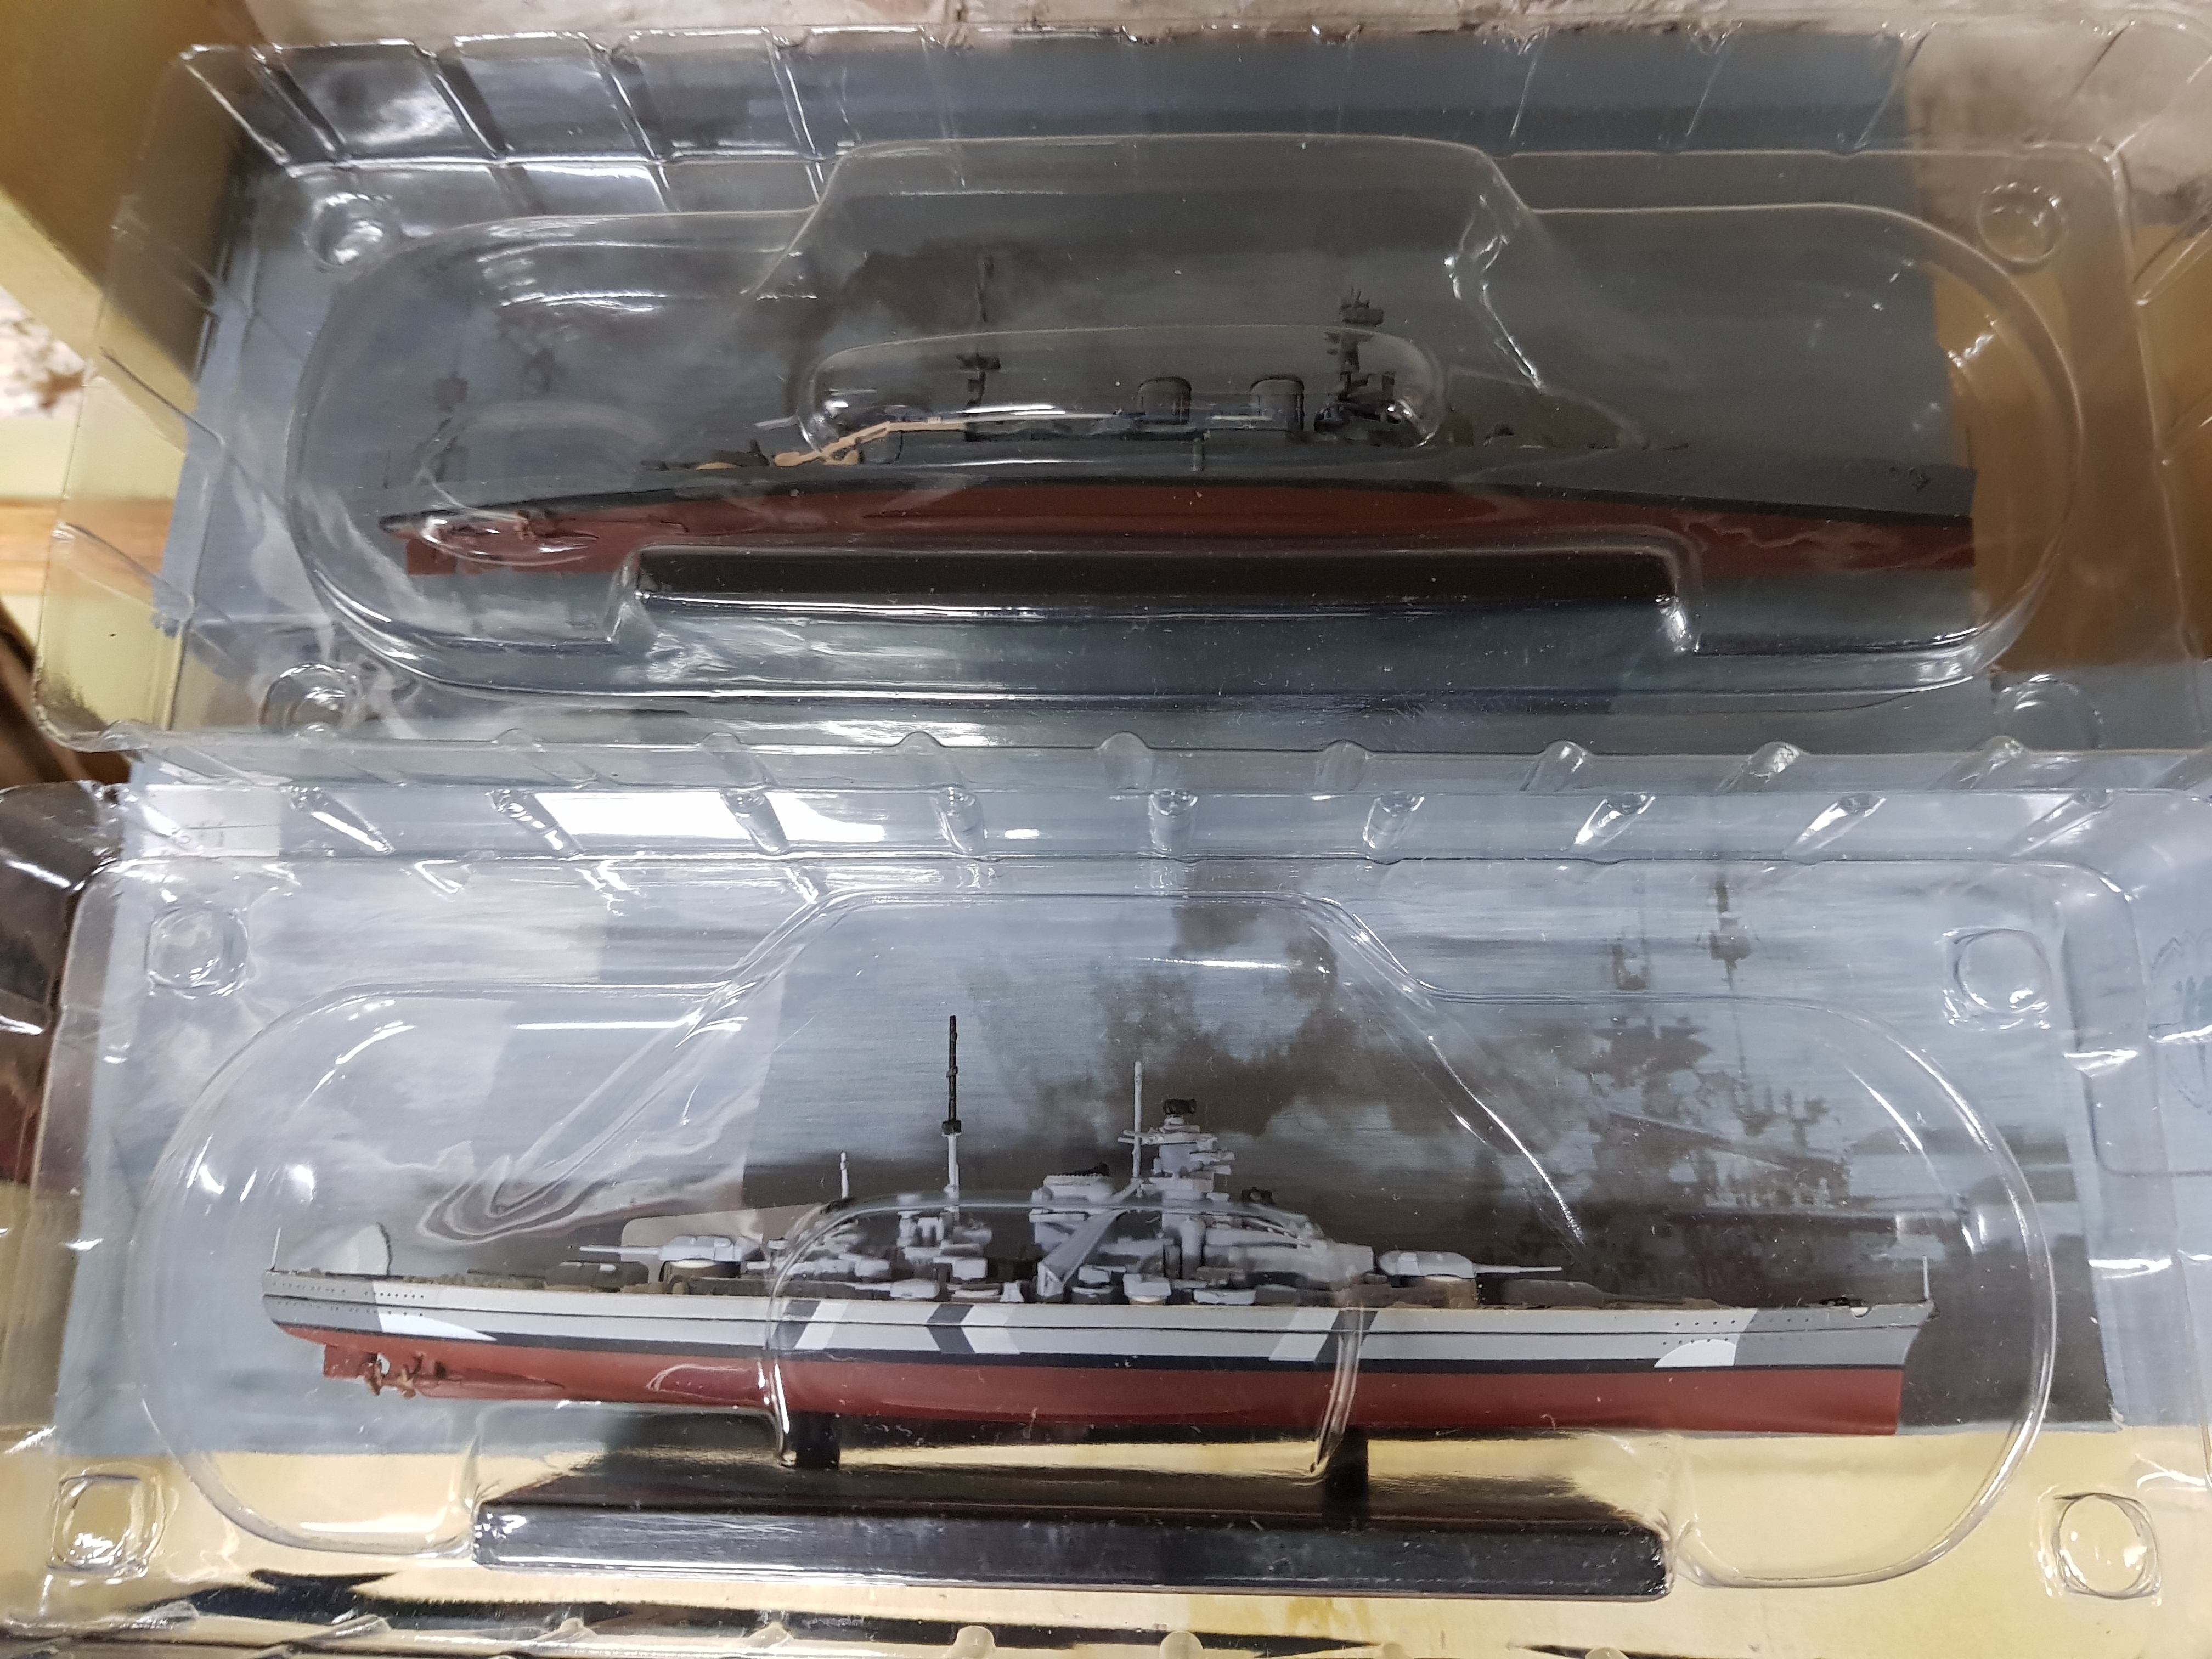 2 SCALE MODEL SHIPS HMS HOOD & BISMARCK IN BOXES WITH CERTIFICATES - Image 2 of 2